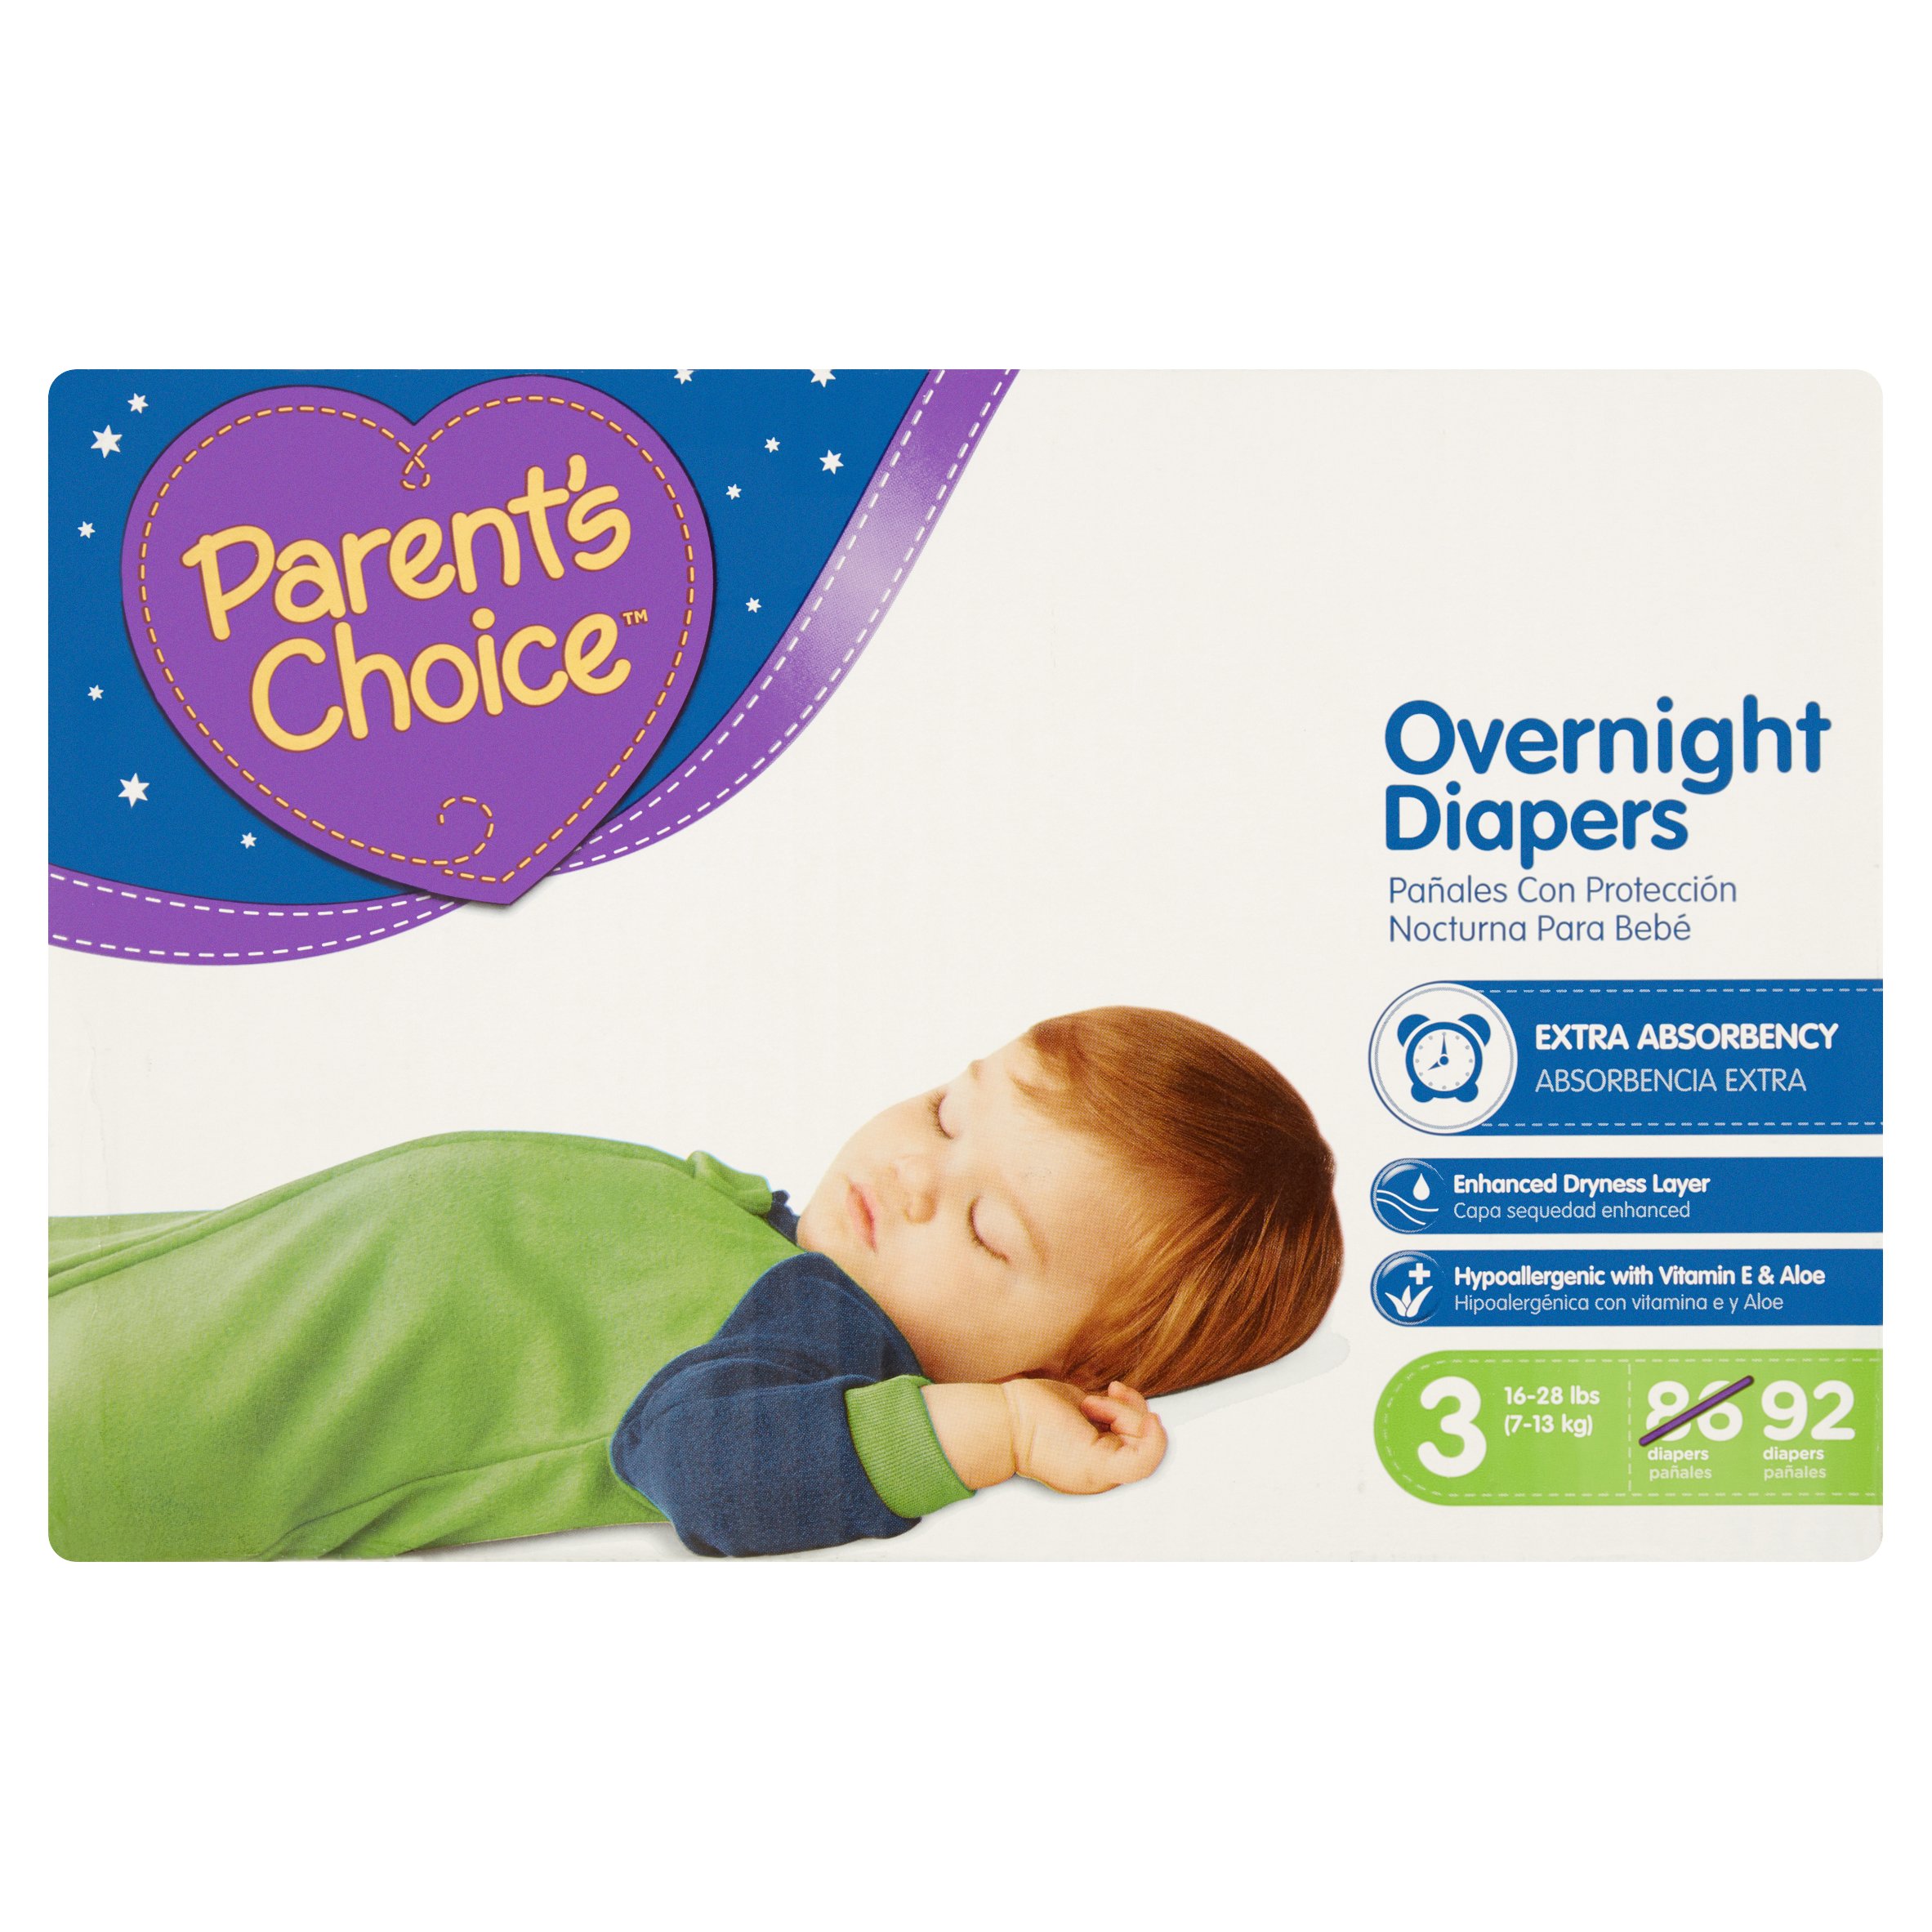 Parent's Choice Overnight Diapers, Size 3, 92 Diapers - image 1 of 5